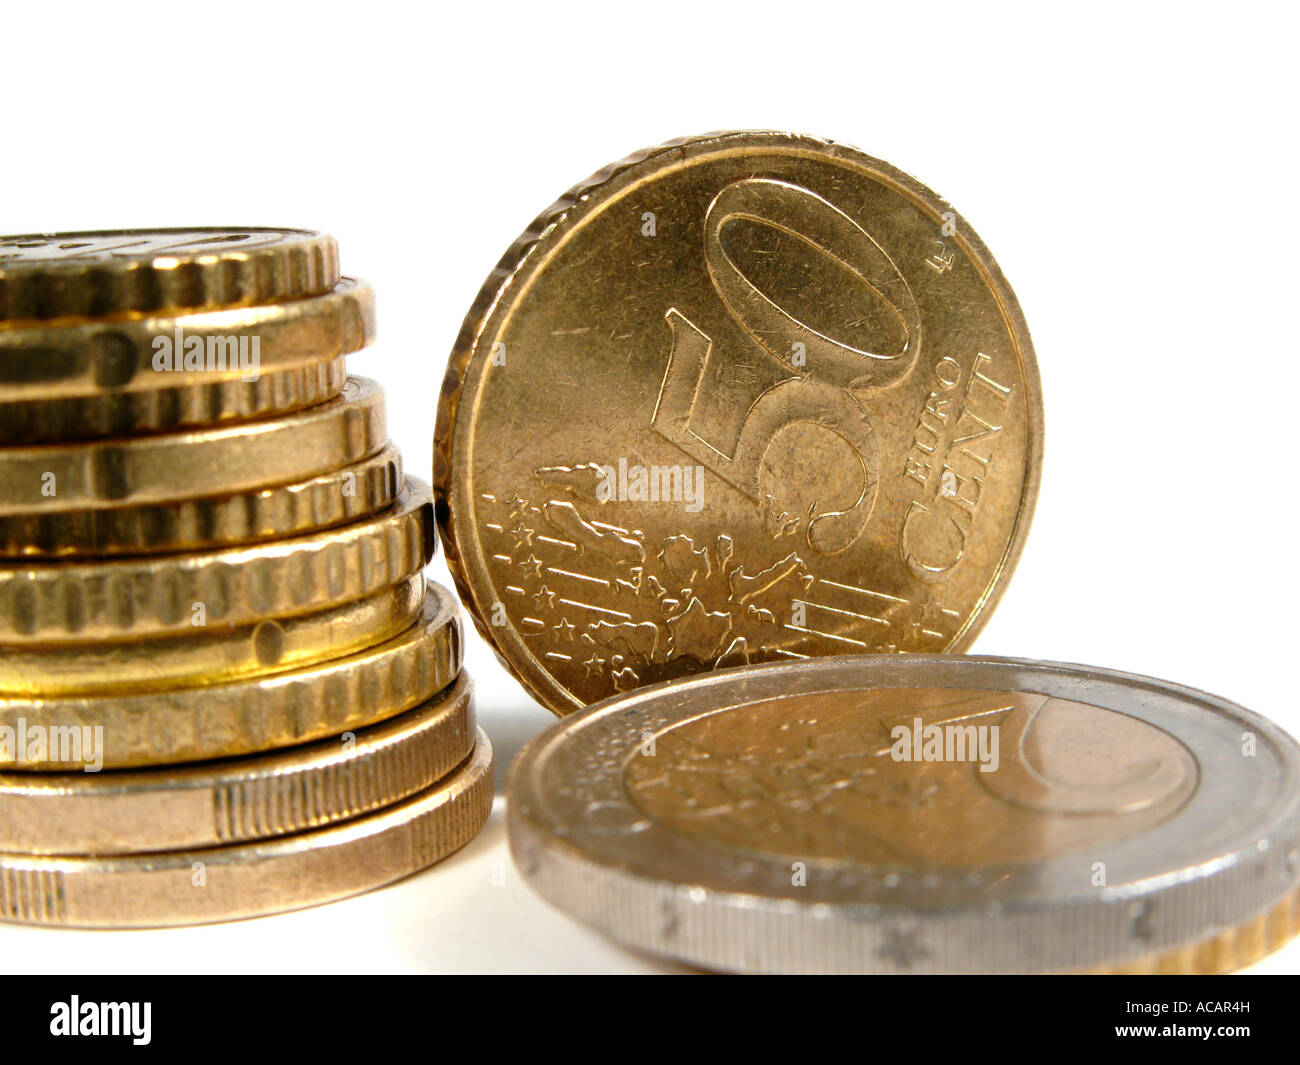 Piled up coins Stock Photo